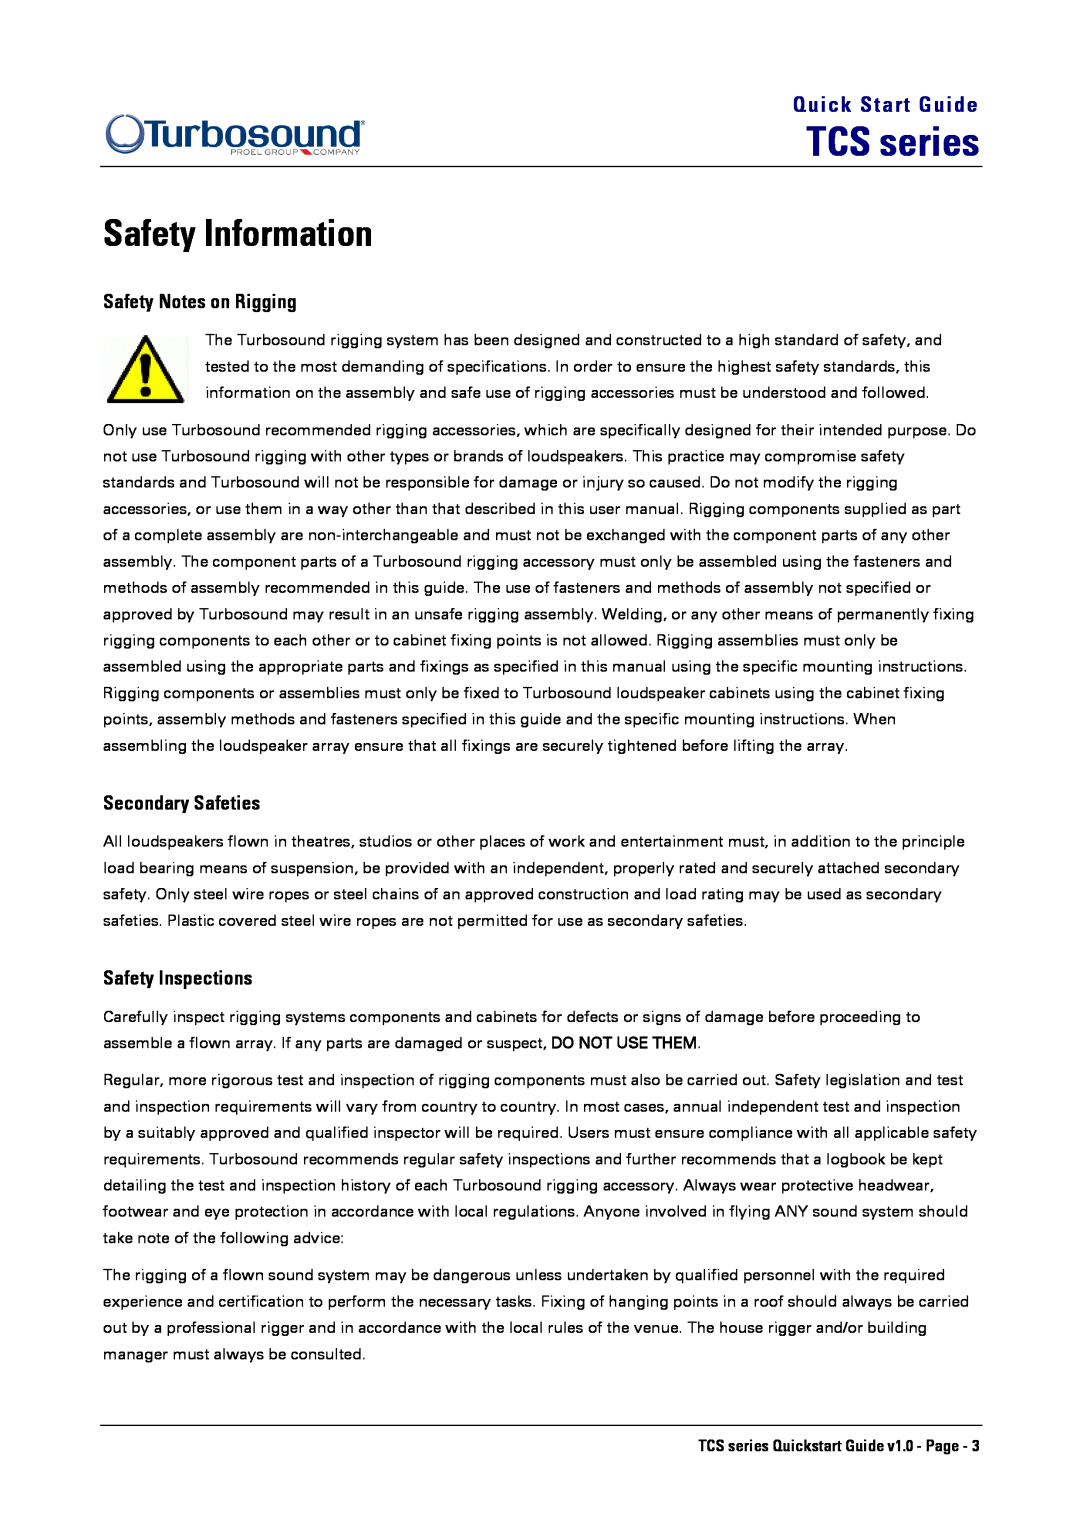 Turbosound TCS-1061 Safety Information, TCS series, Quick Start Guide, Safety Notes on Rigging, Secondary Safeties 